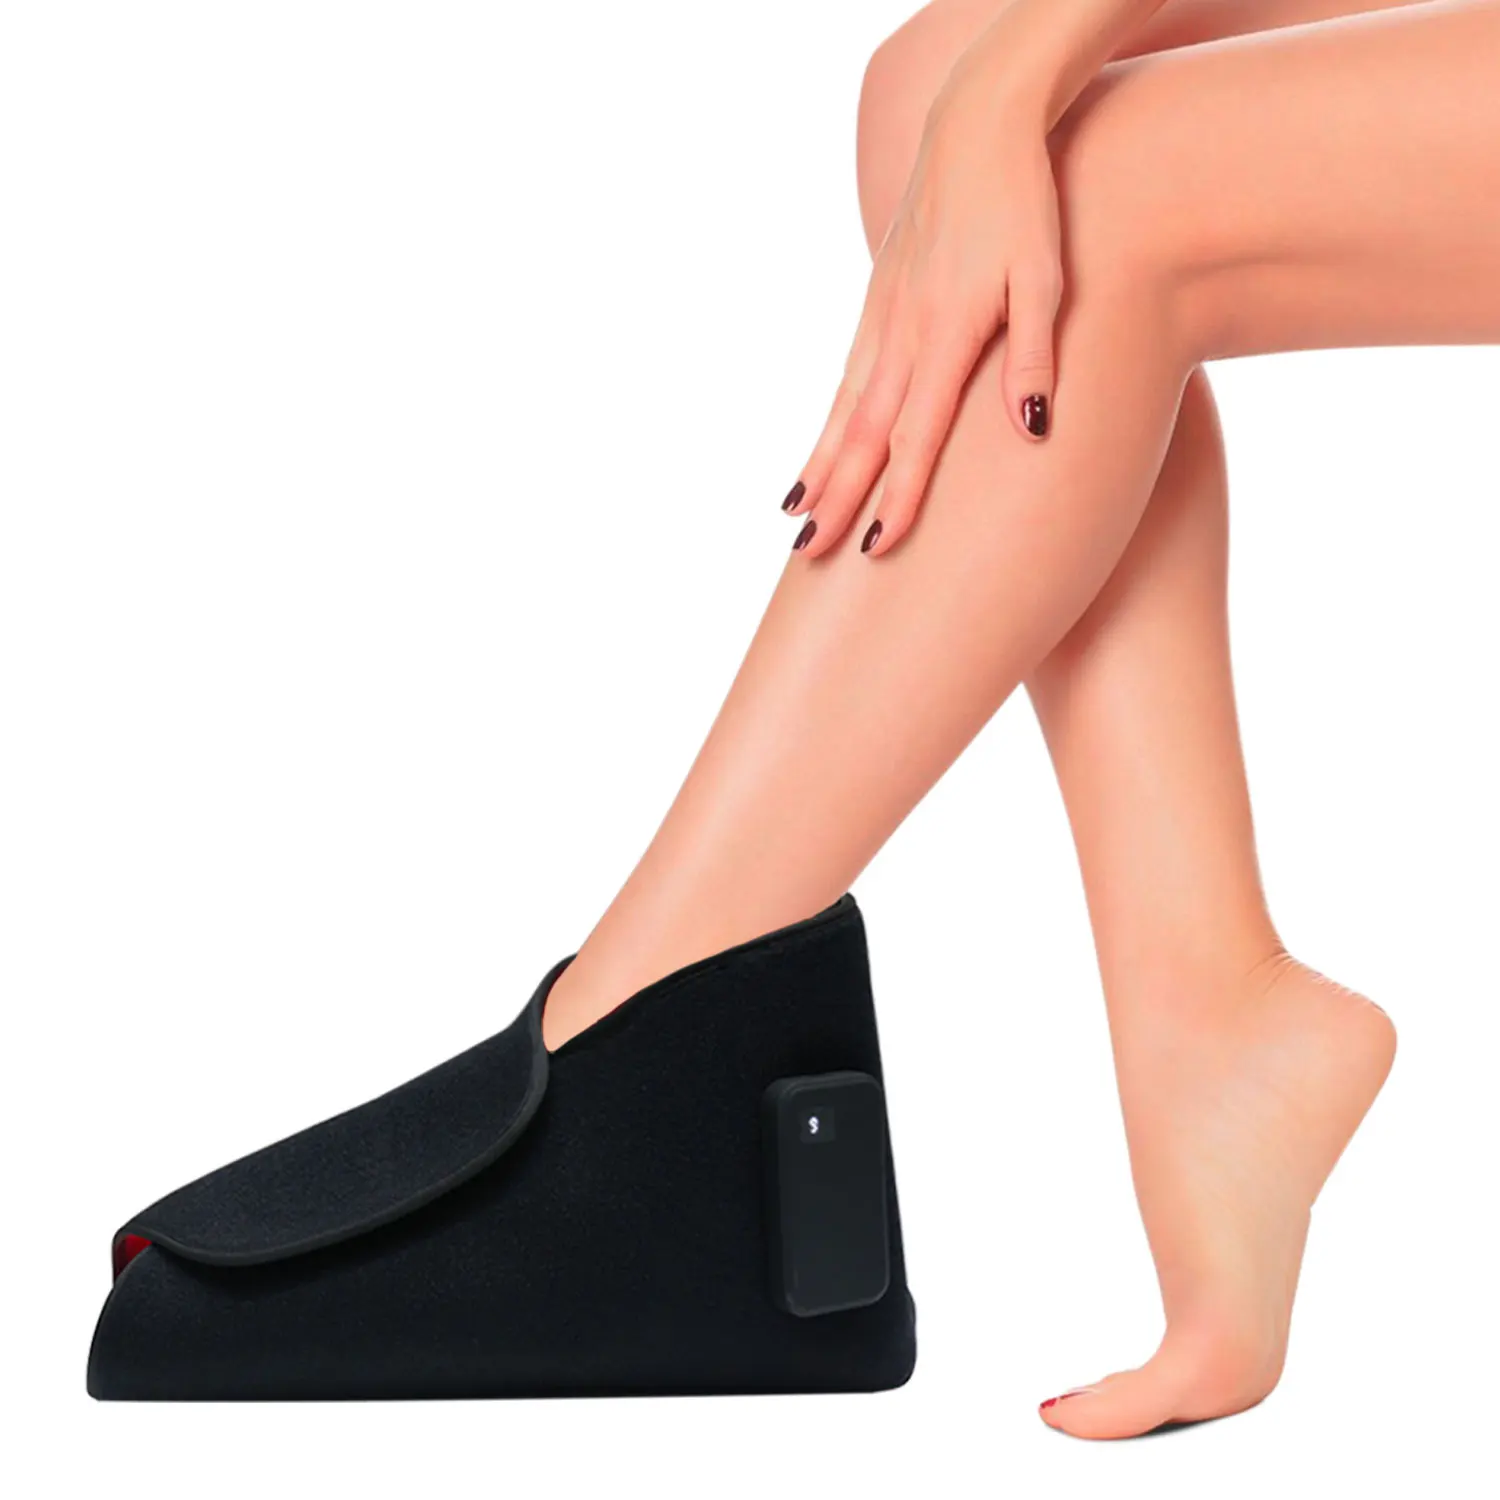 

IDEALIGHT Red & Infrared Light Therapy for Feet 660nm & 850nm LED Red Light Therapy Shoe Device